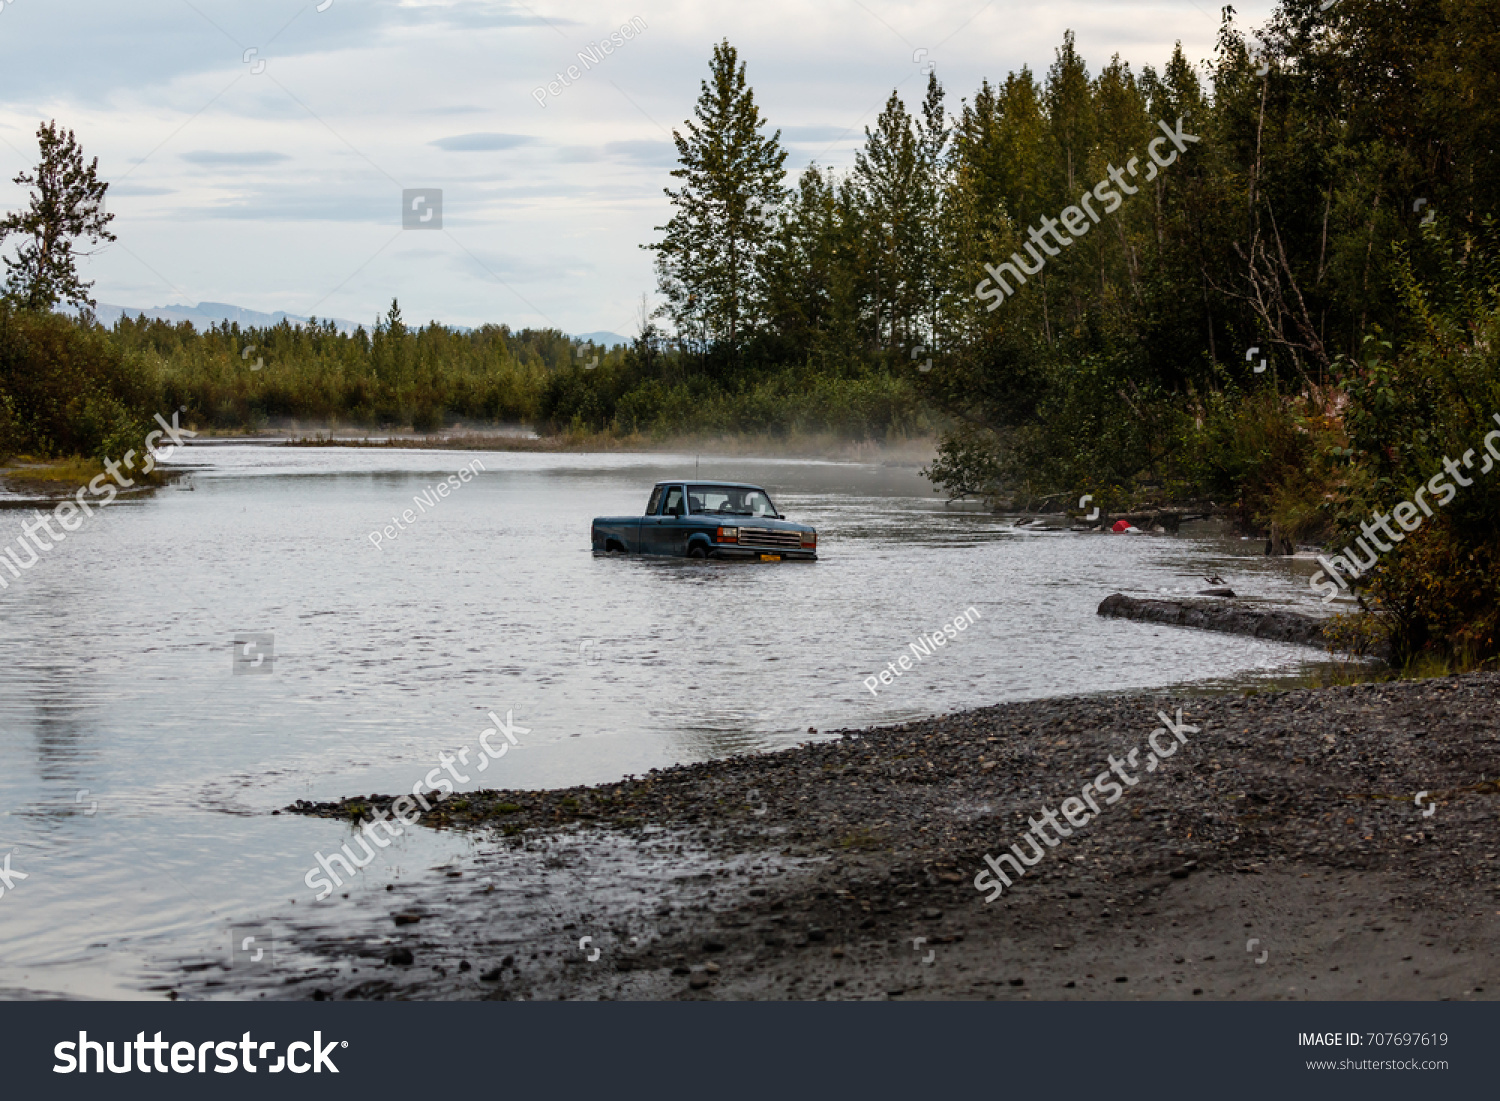 Pickup truck abandoned in high waters of Alaska river #707697619